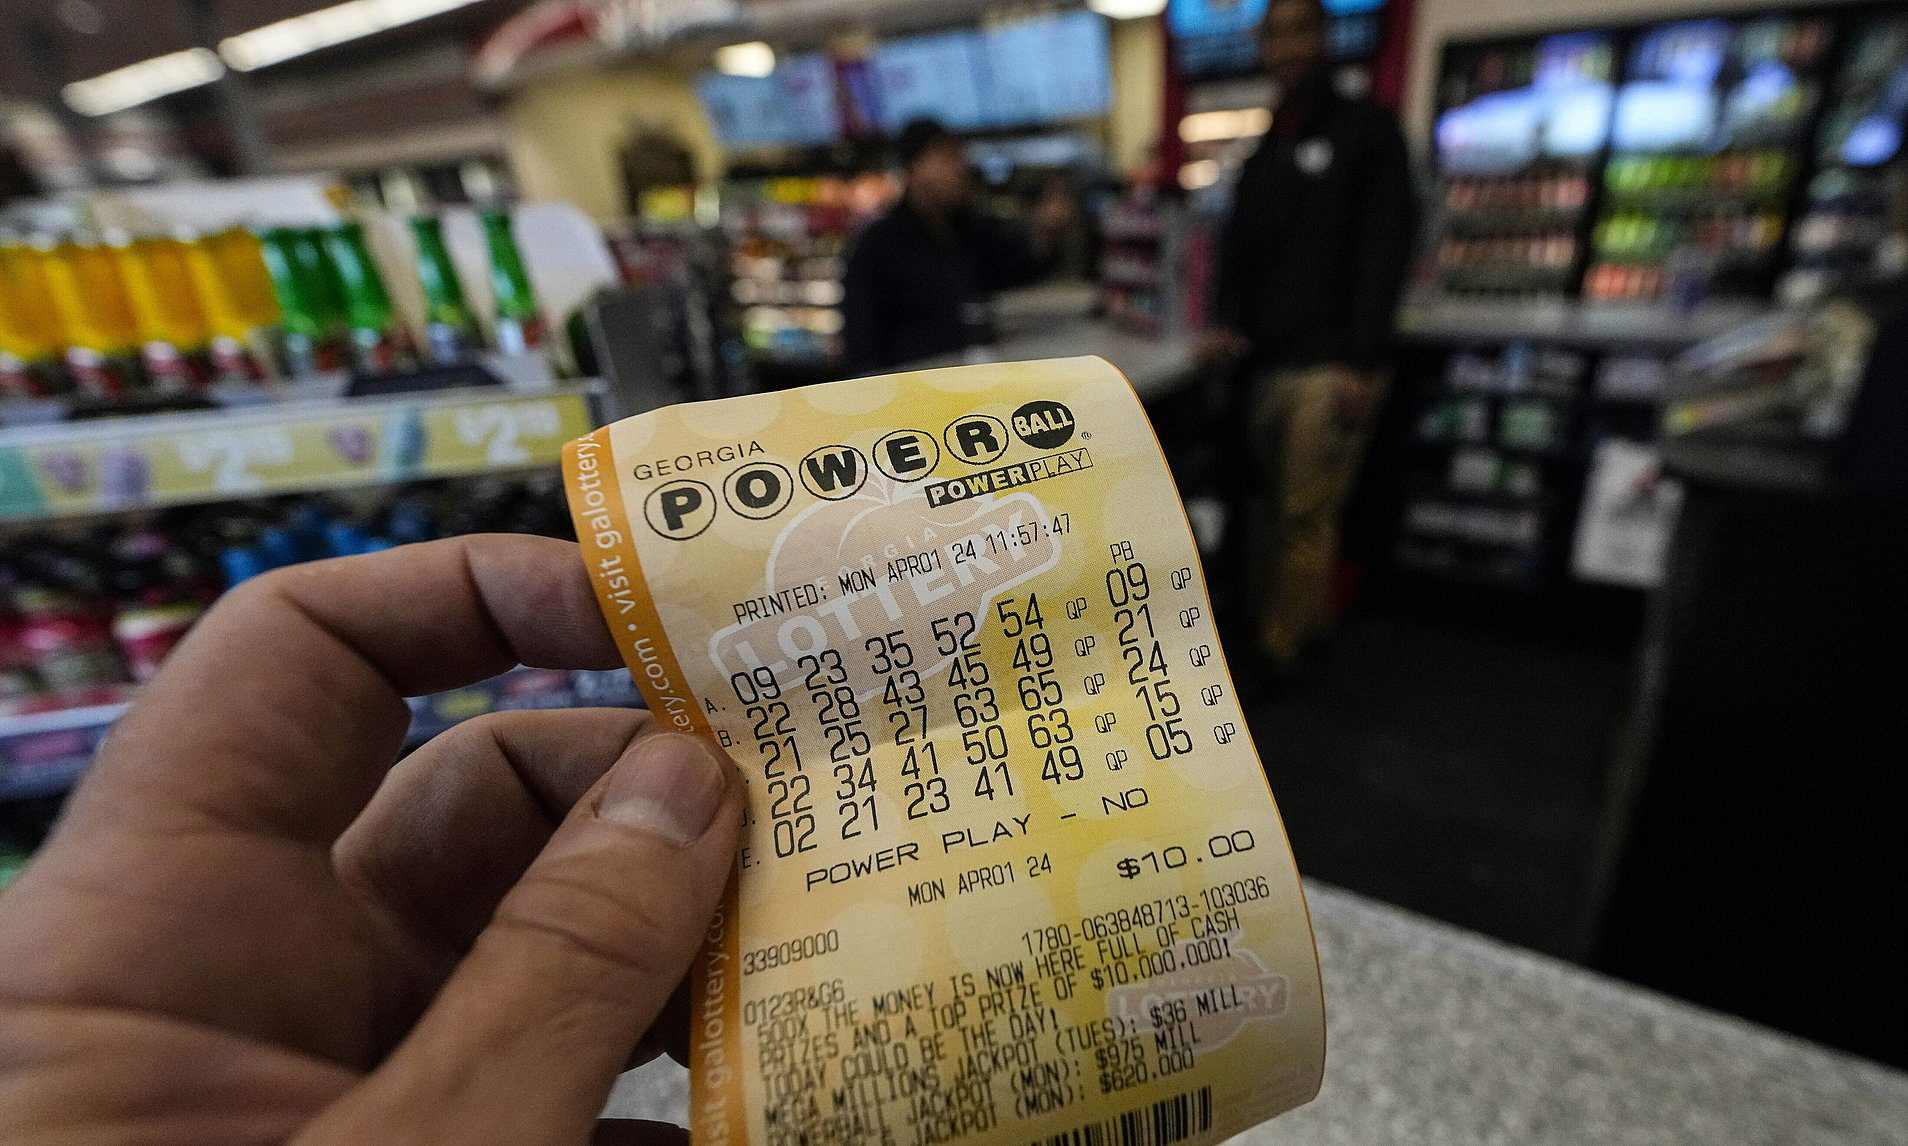 Powerball frenzy as jackpot jumps to 1.23billion the eighth largest